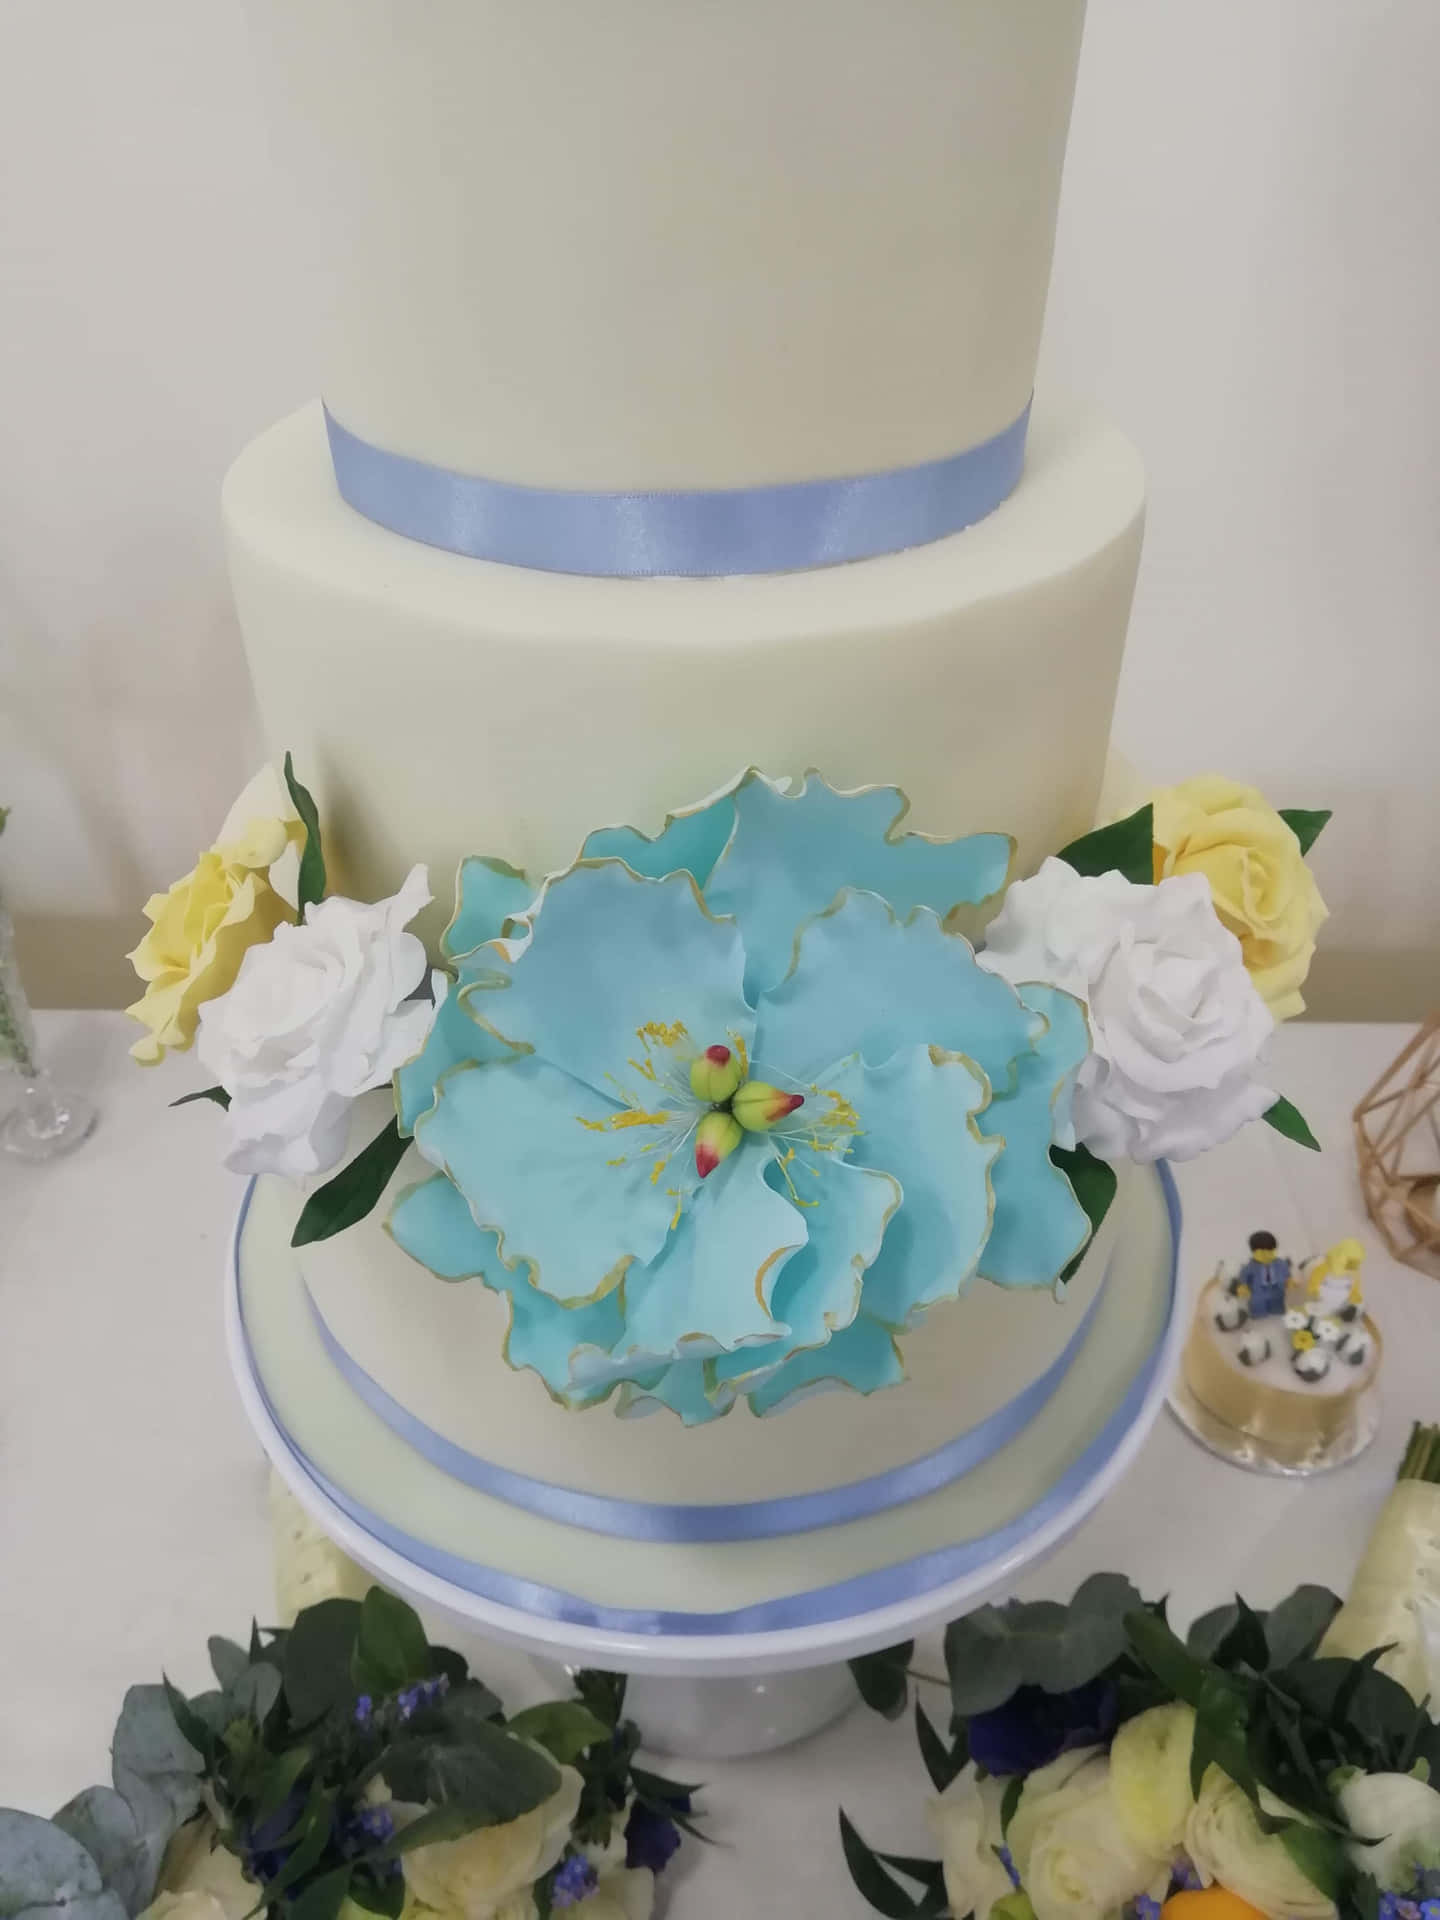 A Delicious and Colorful Cake Fondant Wallpaper